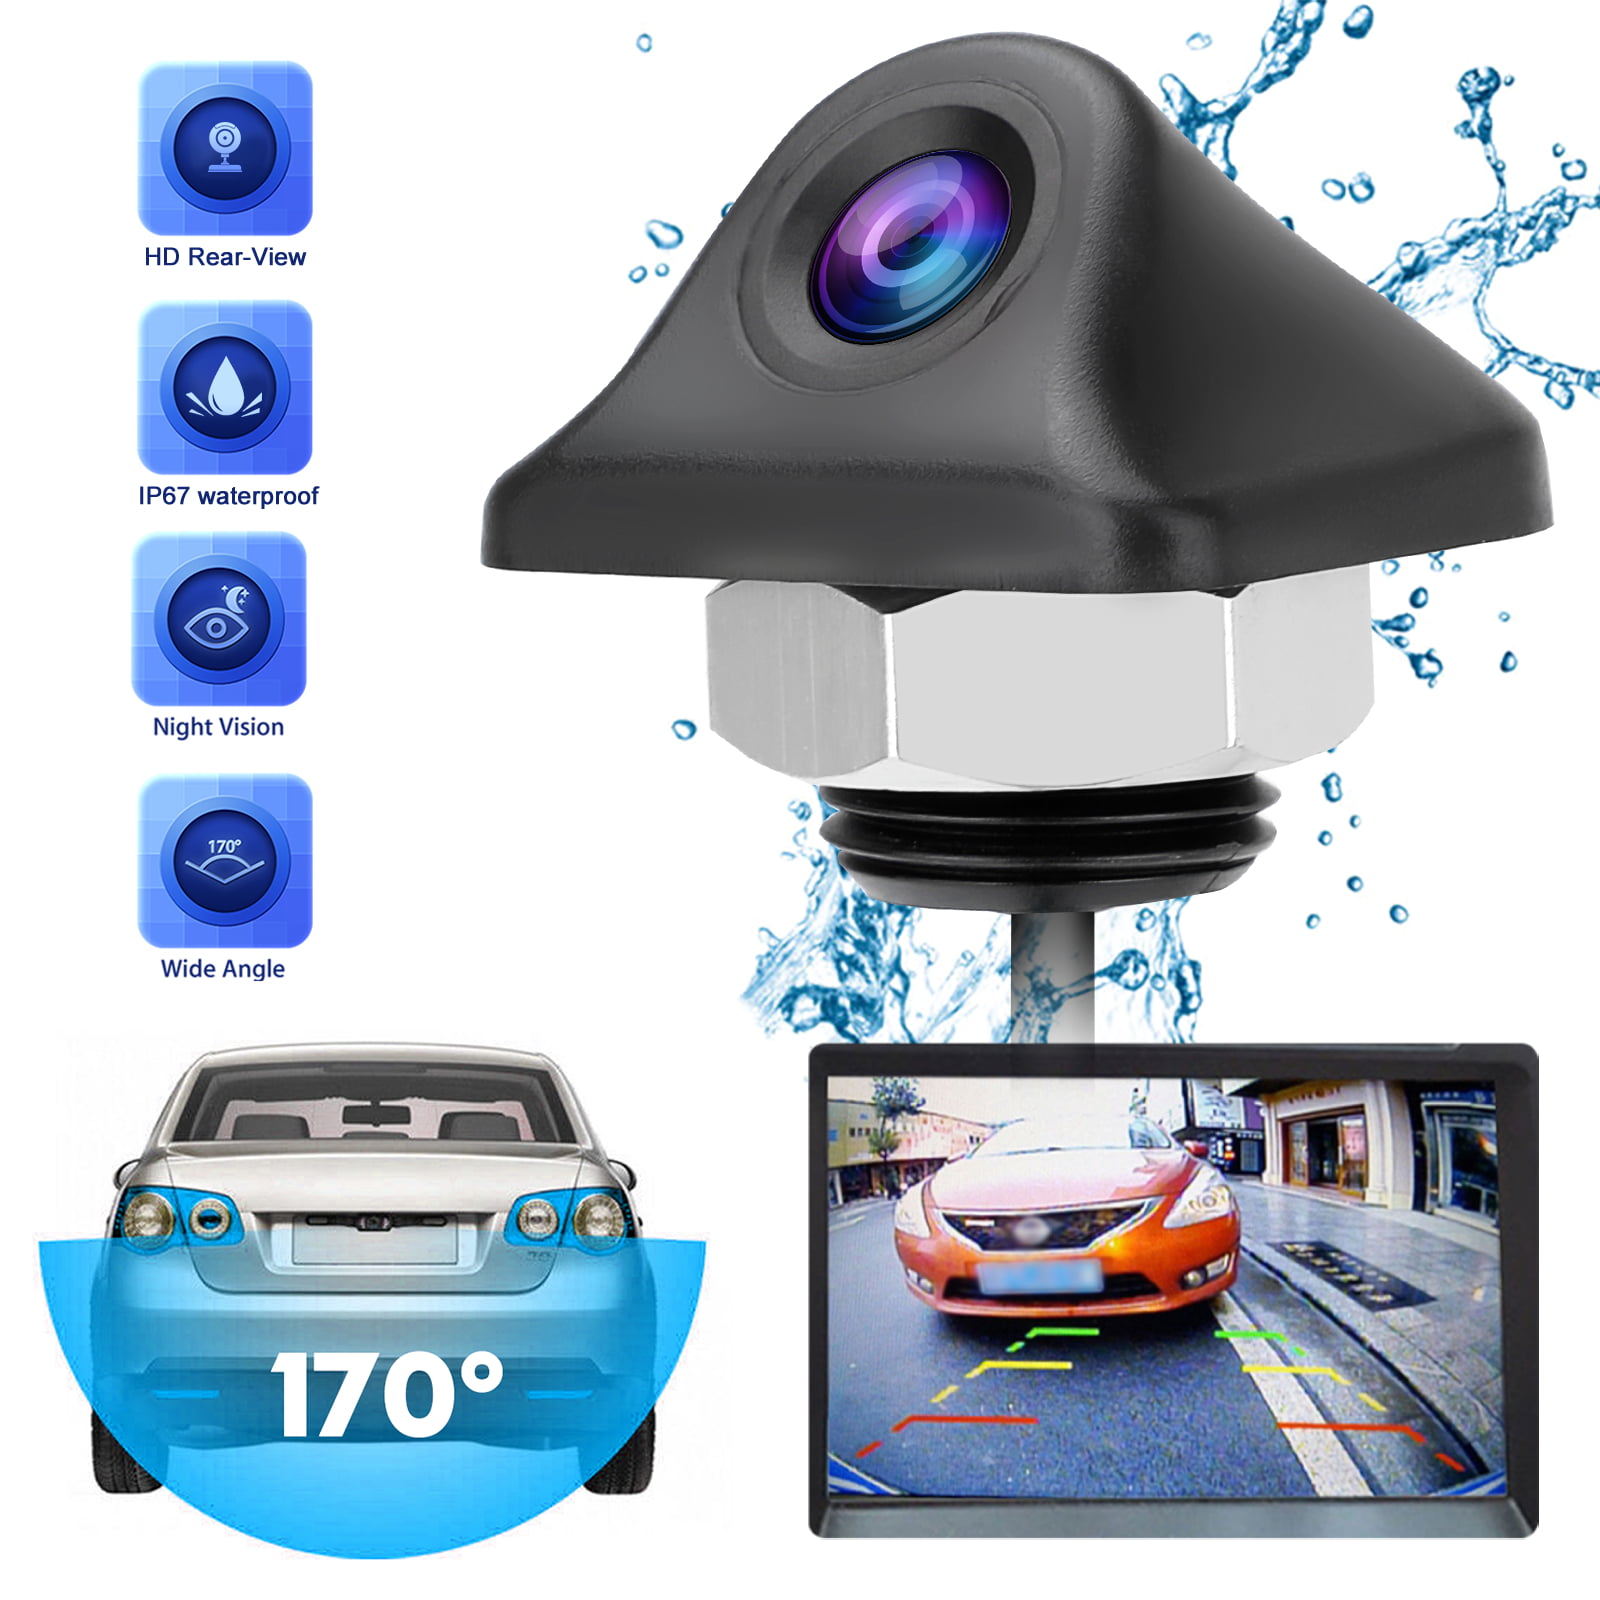 Car Reversing Camera,Universal License Plate Backup Reverse Camera Waterproof Parking Camera With Wide Viewing Angles For Cars Blind Zone Camera 